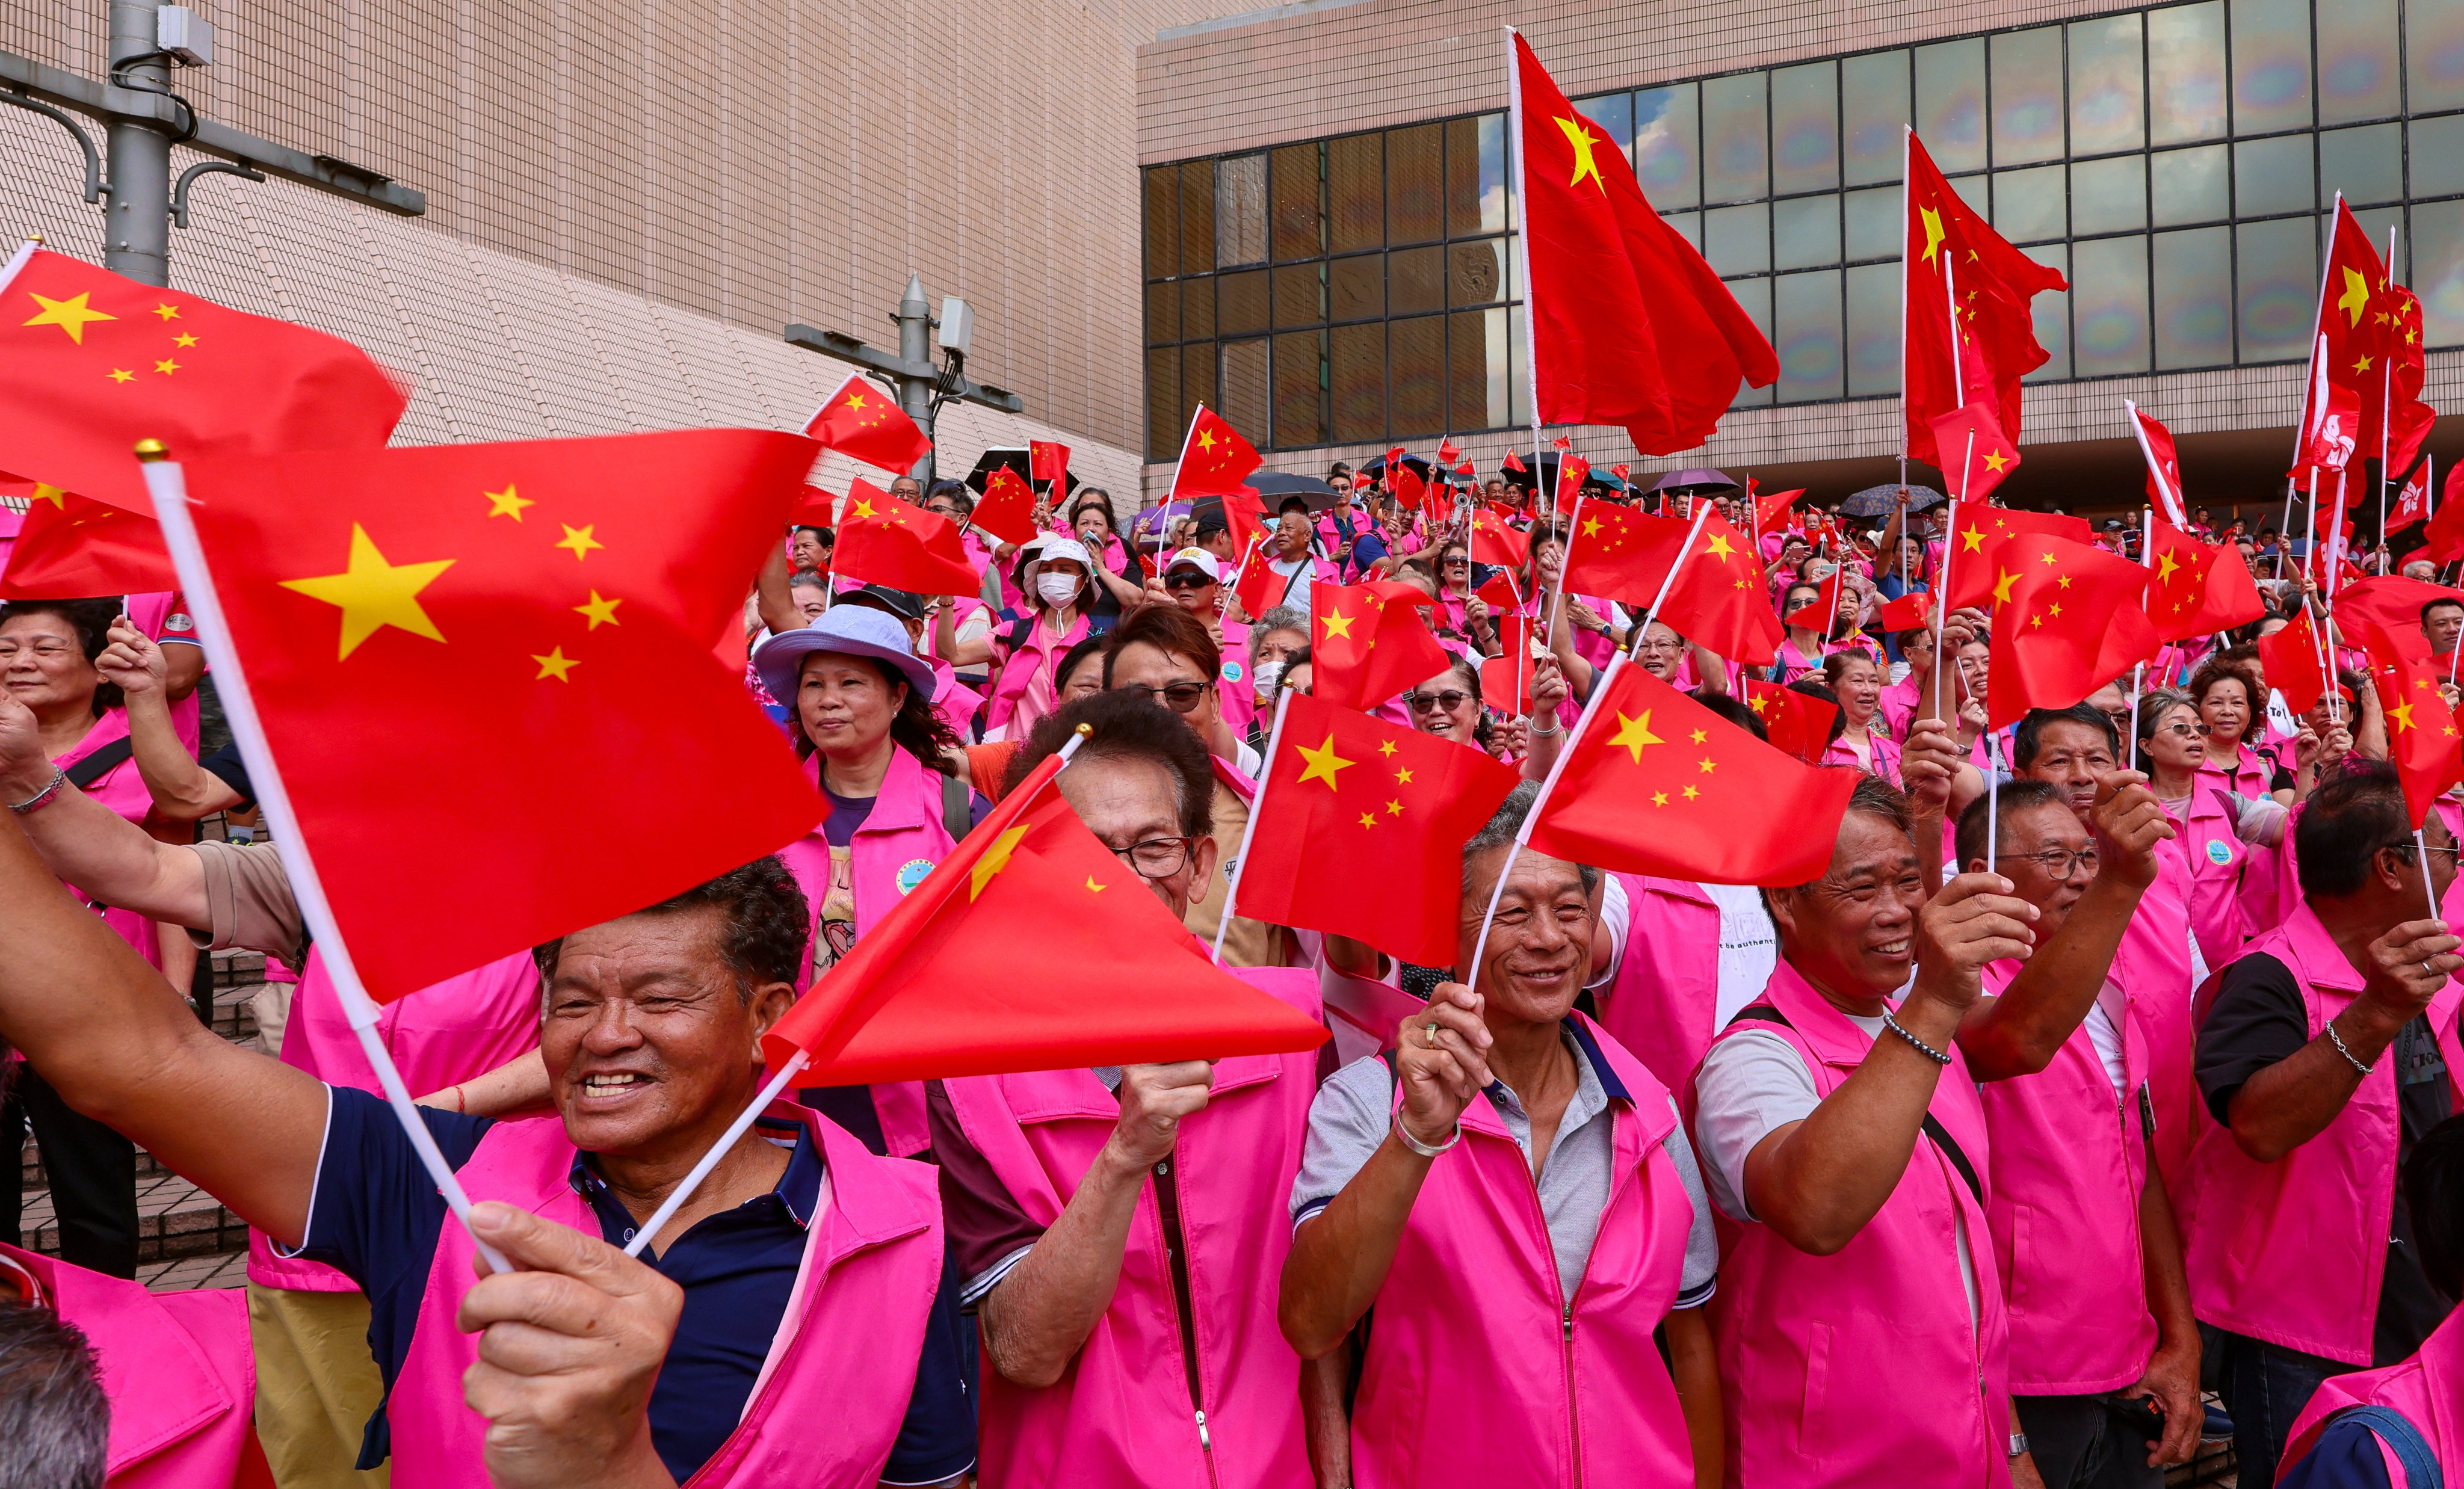 Spectators fly the flag at an event in Hong Kong to mark the July 1 anniversary on Monday. Photo: Jelly Tse